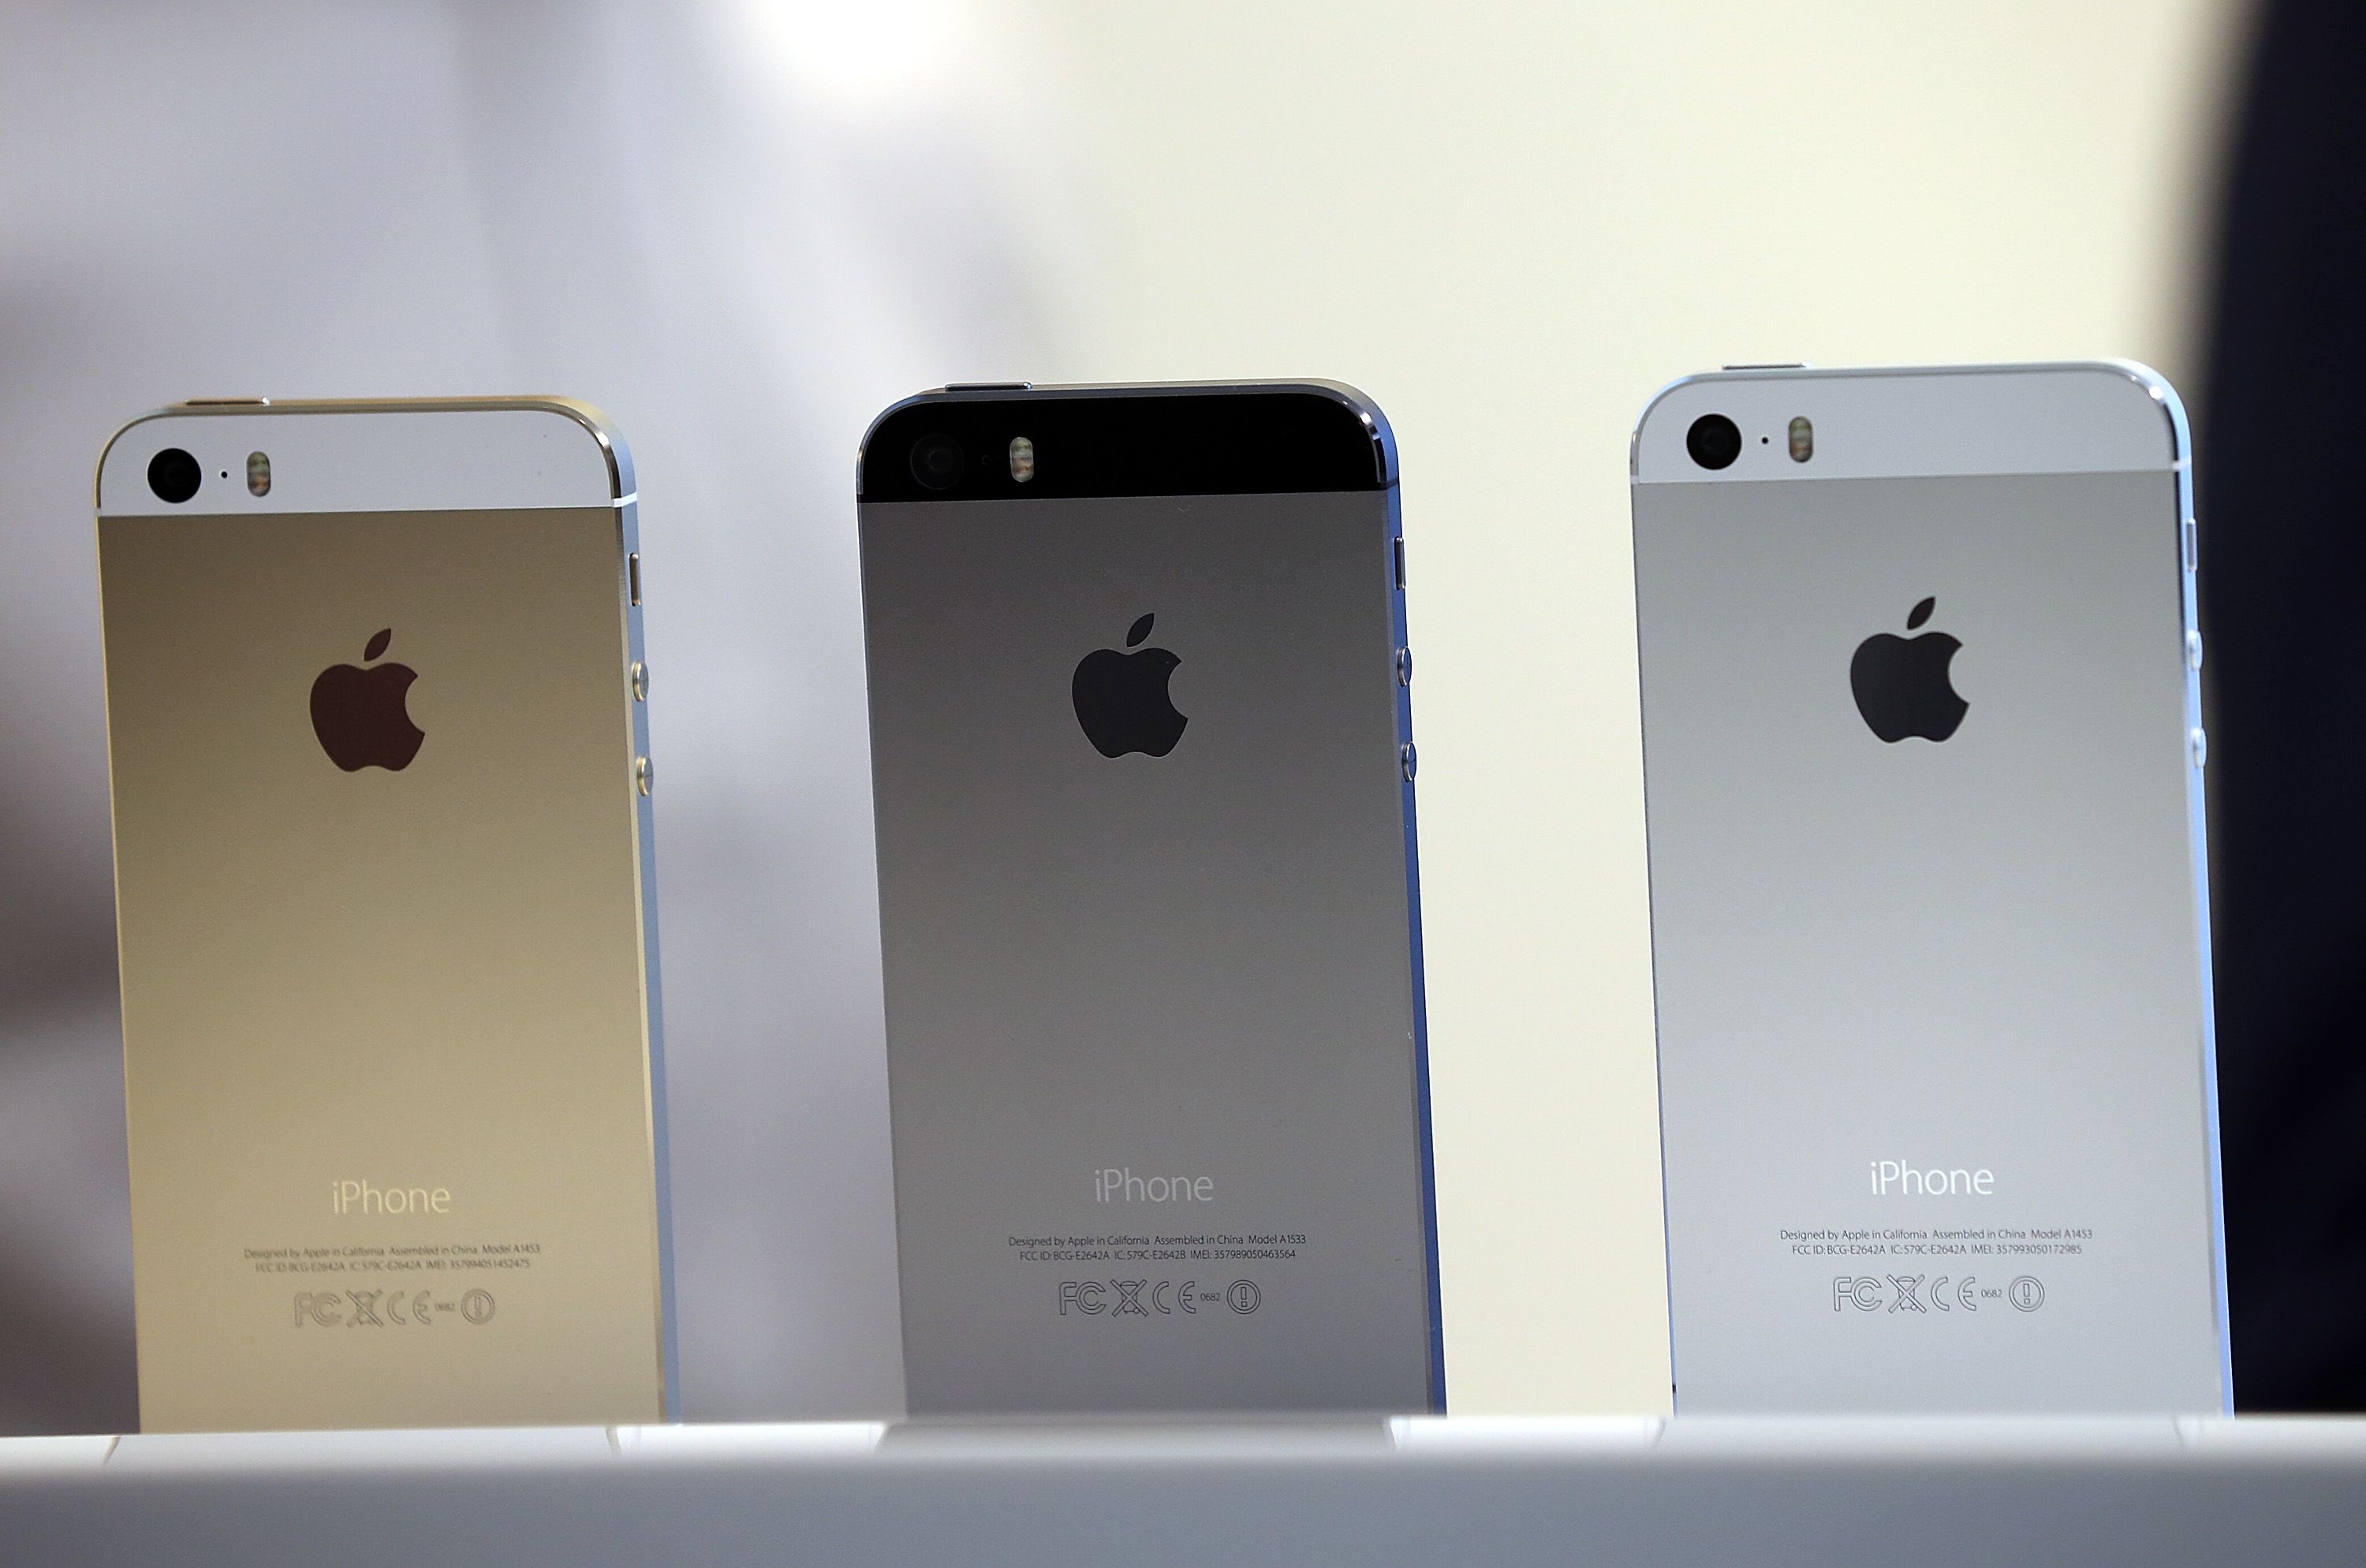 iphone 5s colors gold price